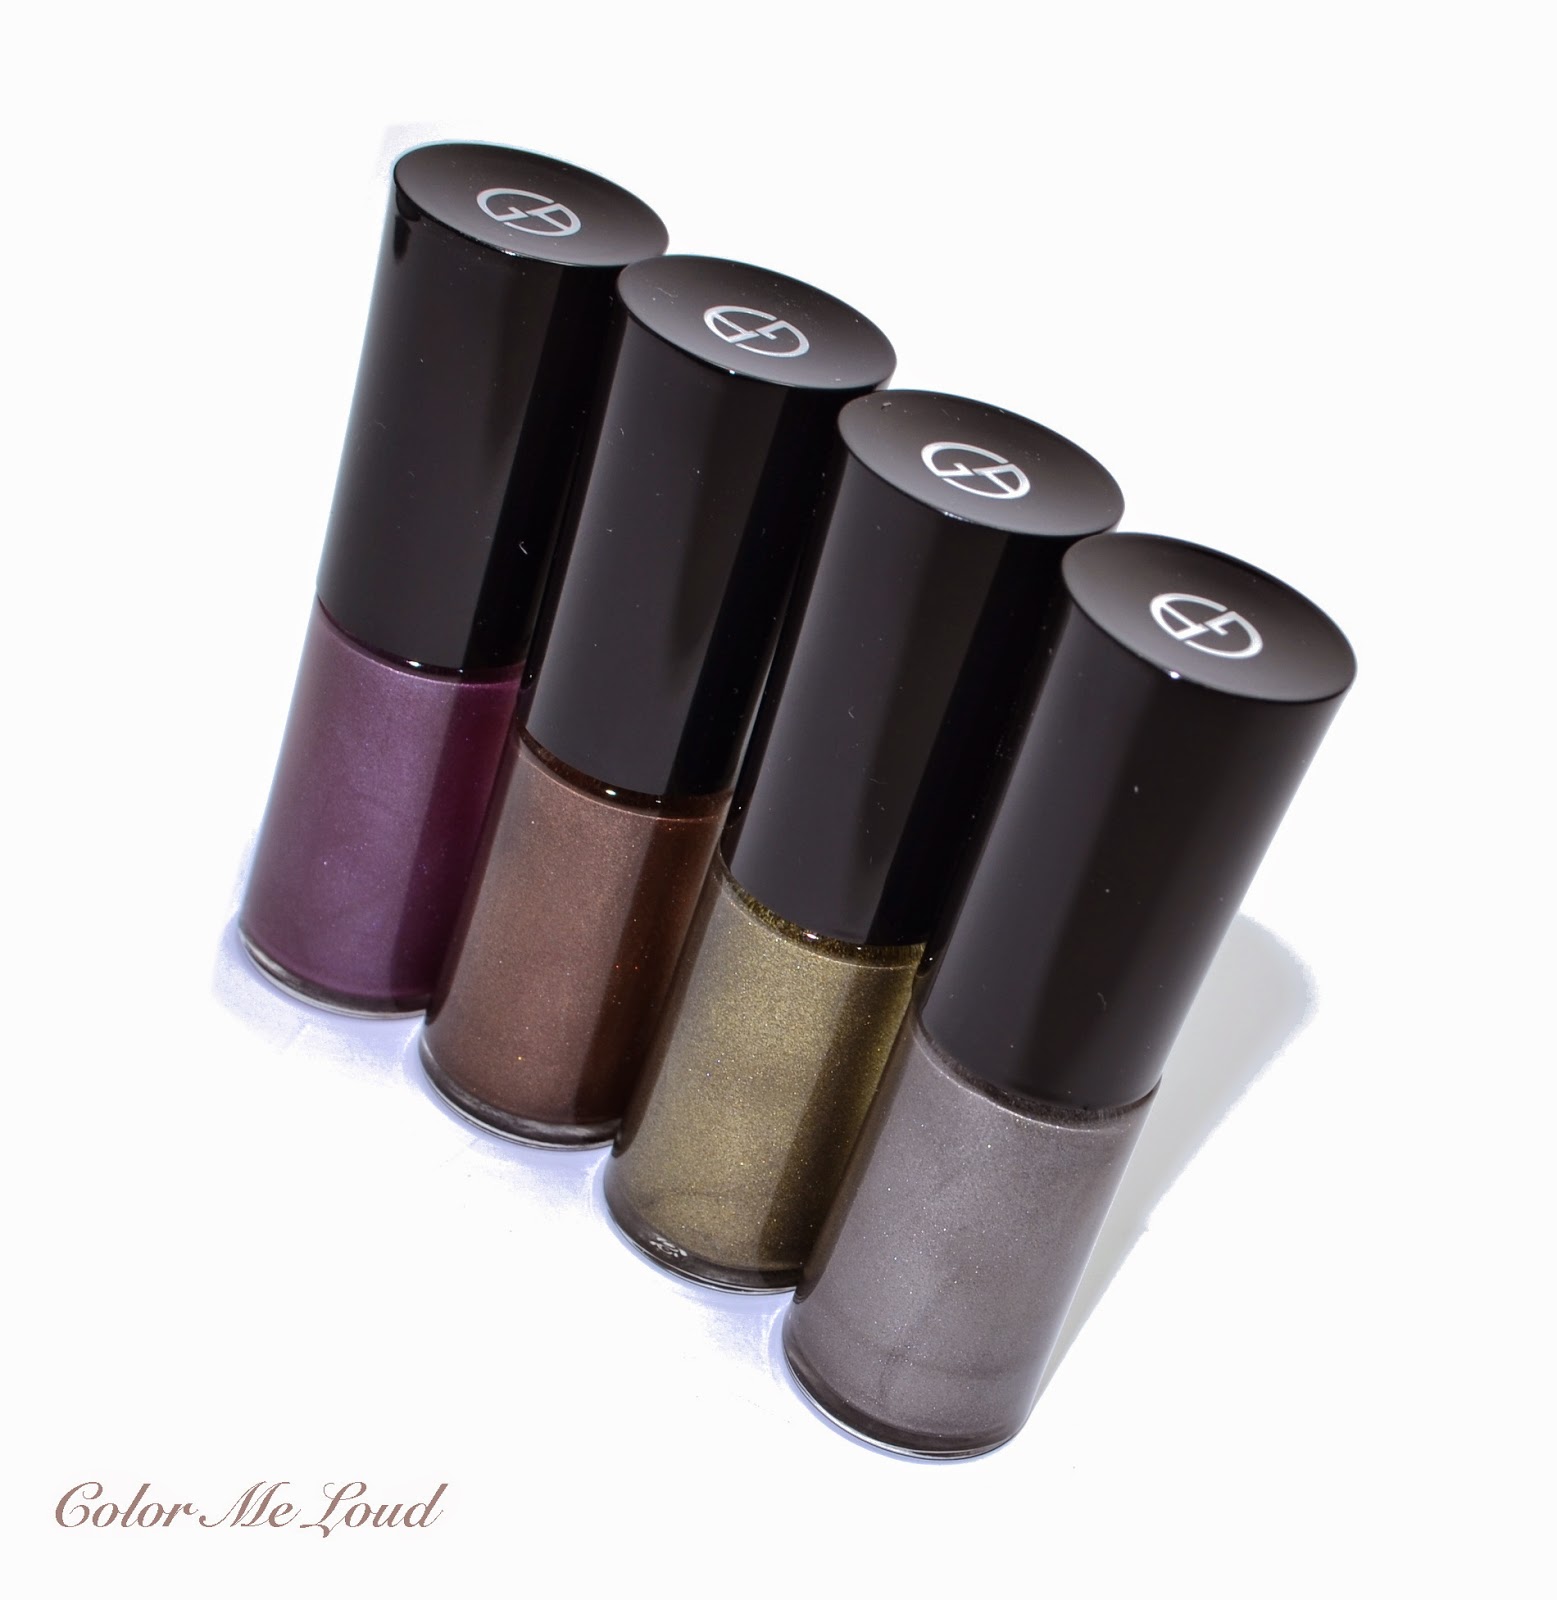 Giorgio Armani Nail Lacquer #214 Incence Velvet, #624 Crimson Velvet, #714 Iron Velvet and #724 Acid Velvet from Fade to Grey Fall 2014 Collection, Review & Swatches